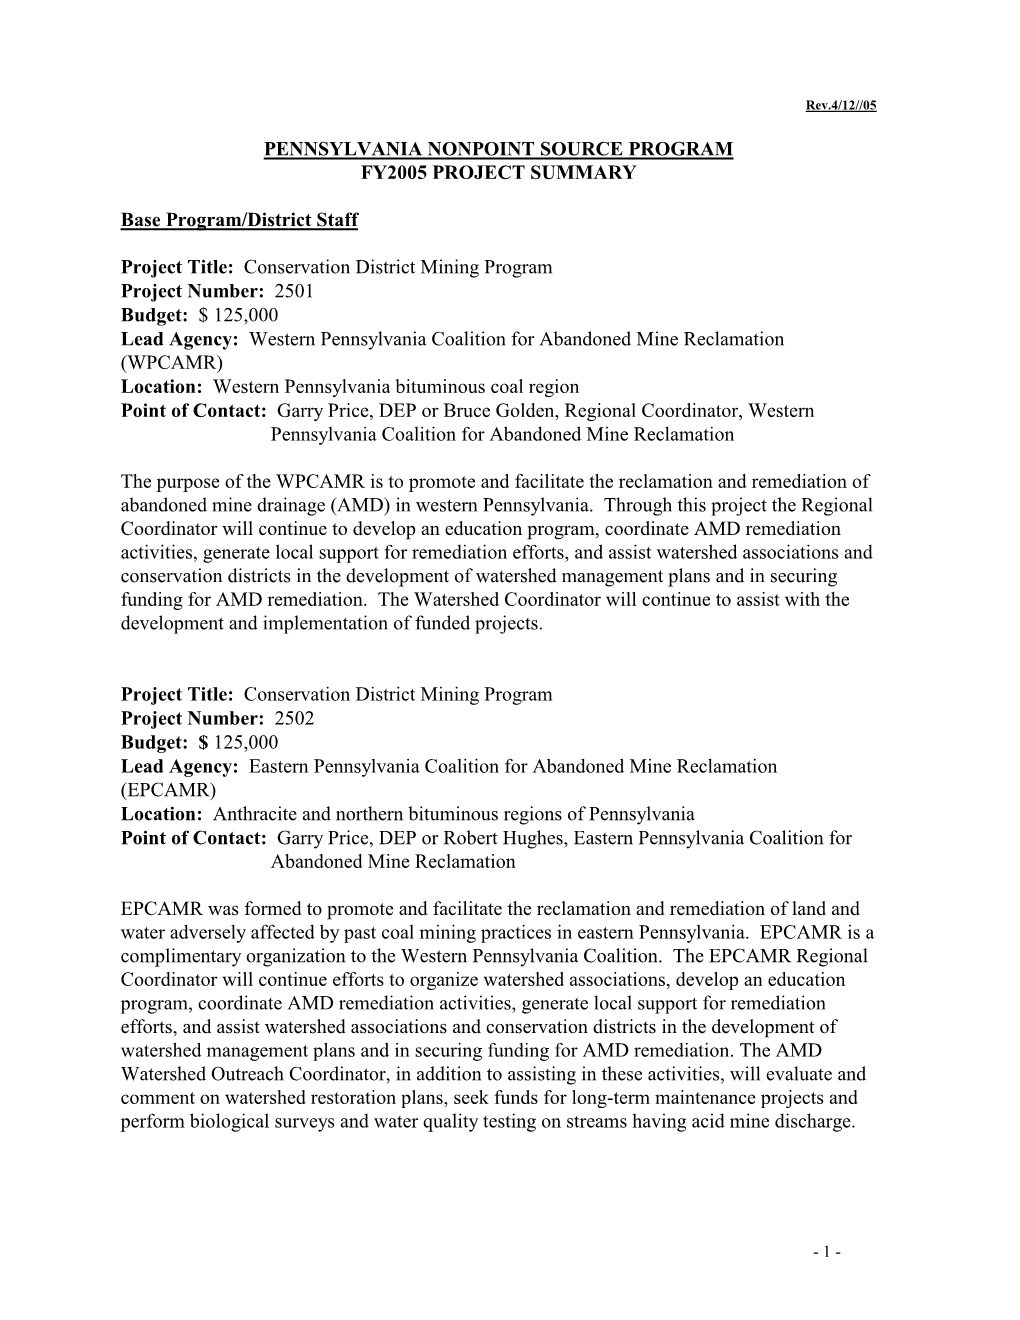 Pennsylvania Nonpoint Source Program Fy2005 Project Summary